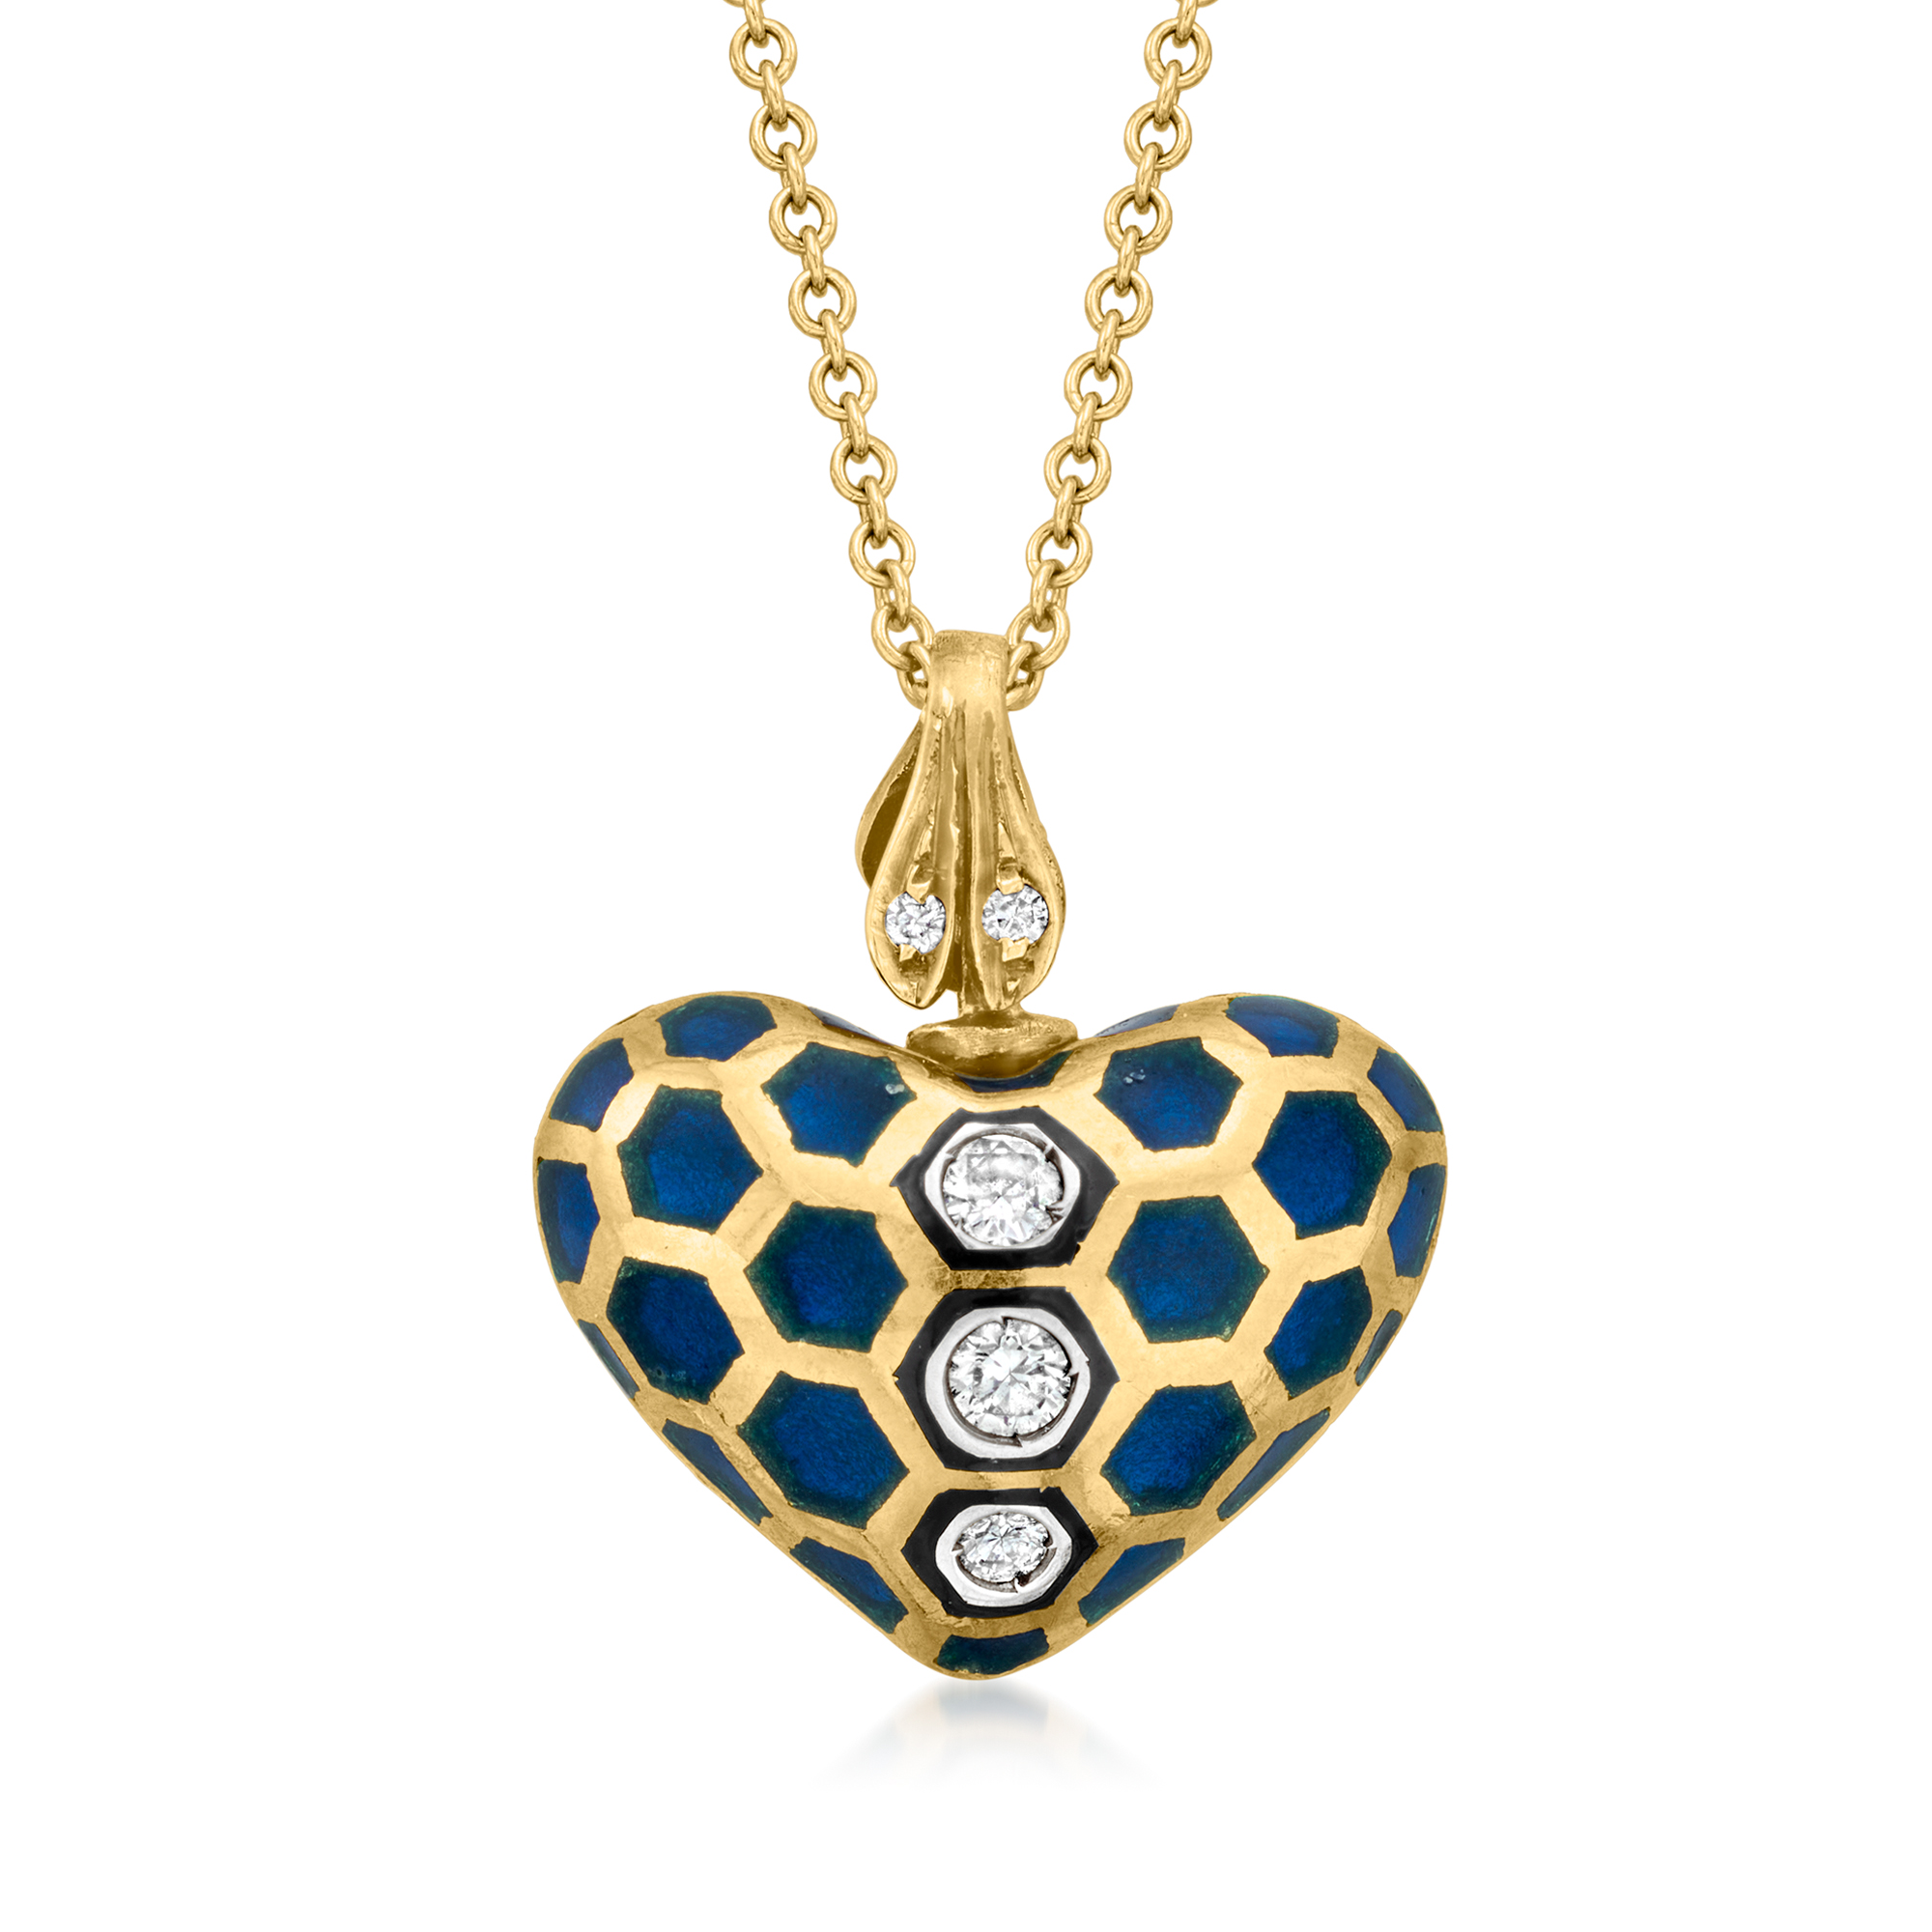 C. 1990 Vintage .15 ct. t.w. Diamond Heart Necklace with Blue Enamel in  18kt Yellow Gold. 16" | Ross-Simons